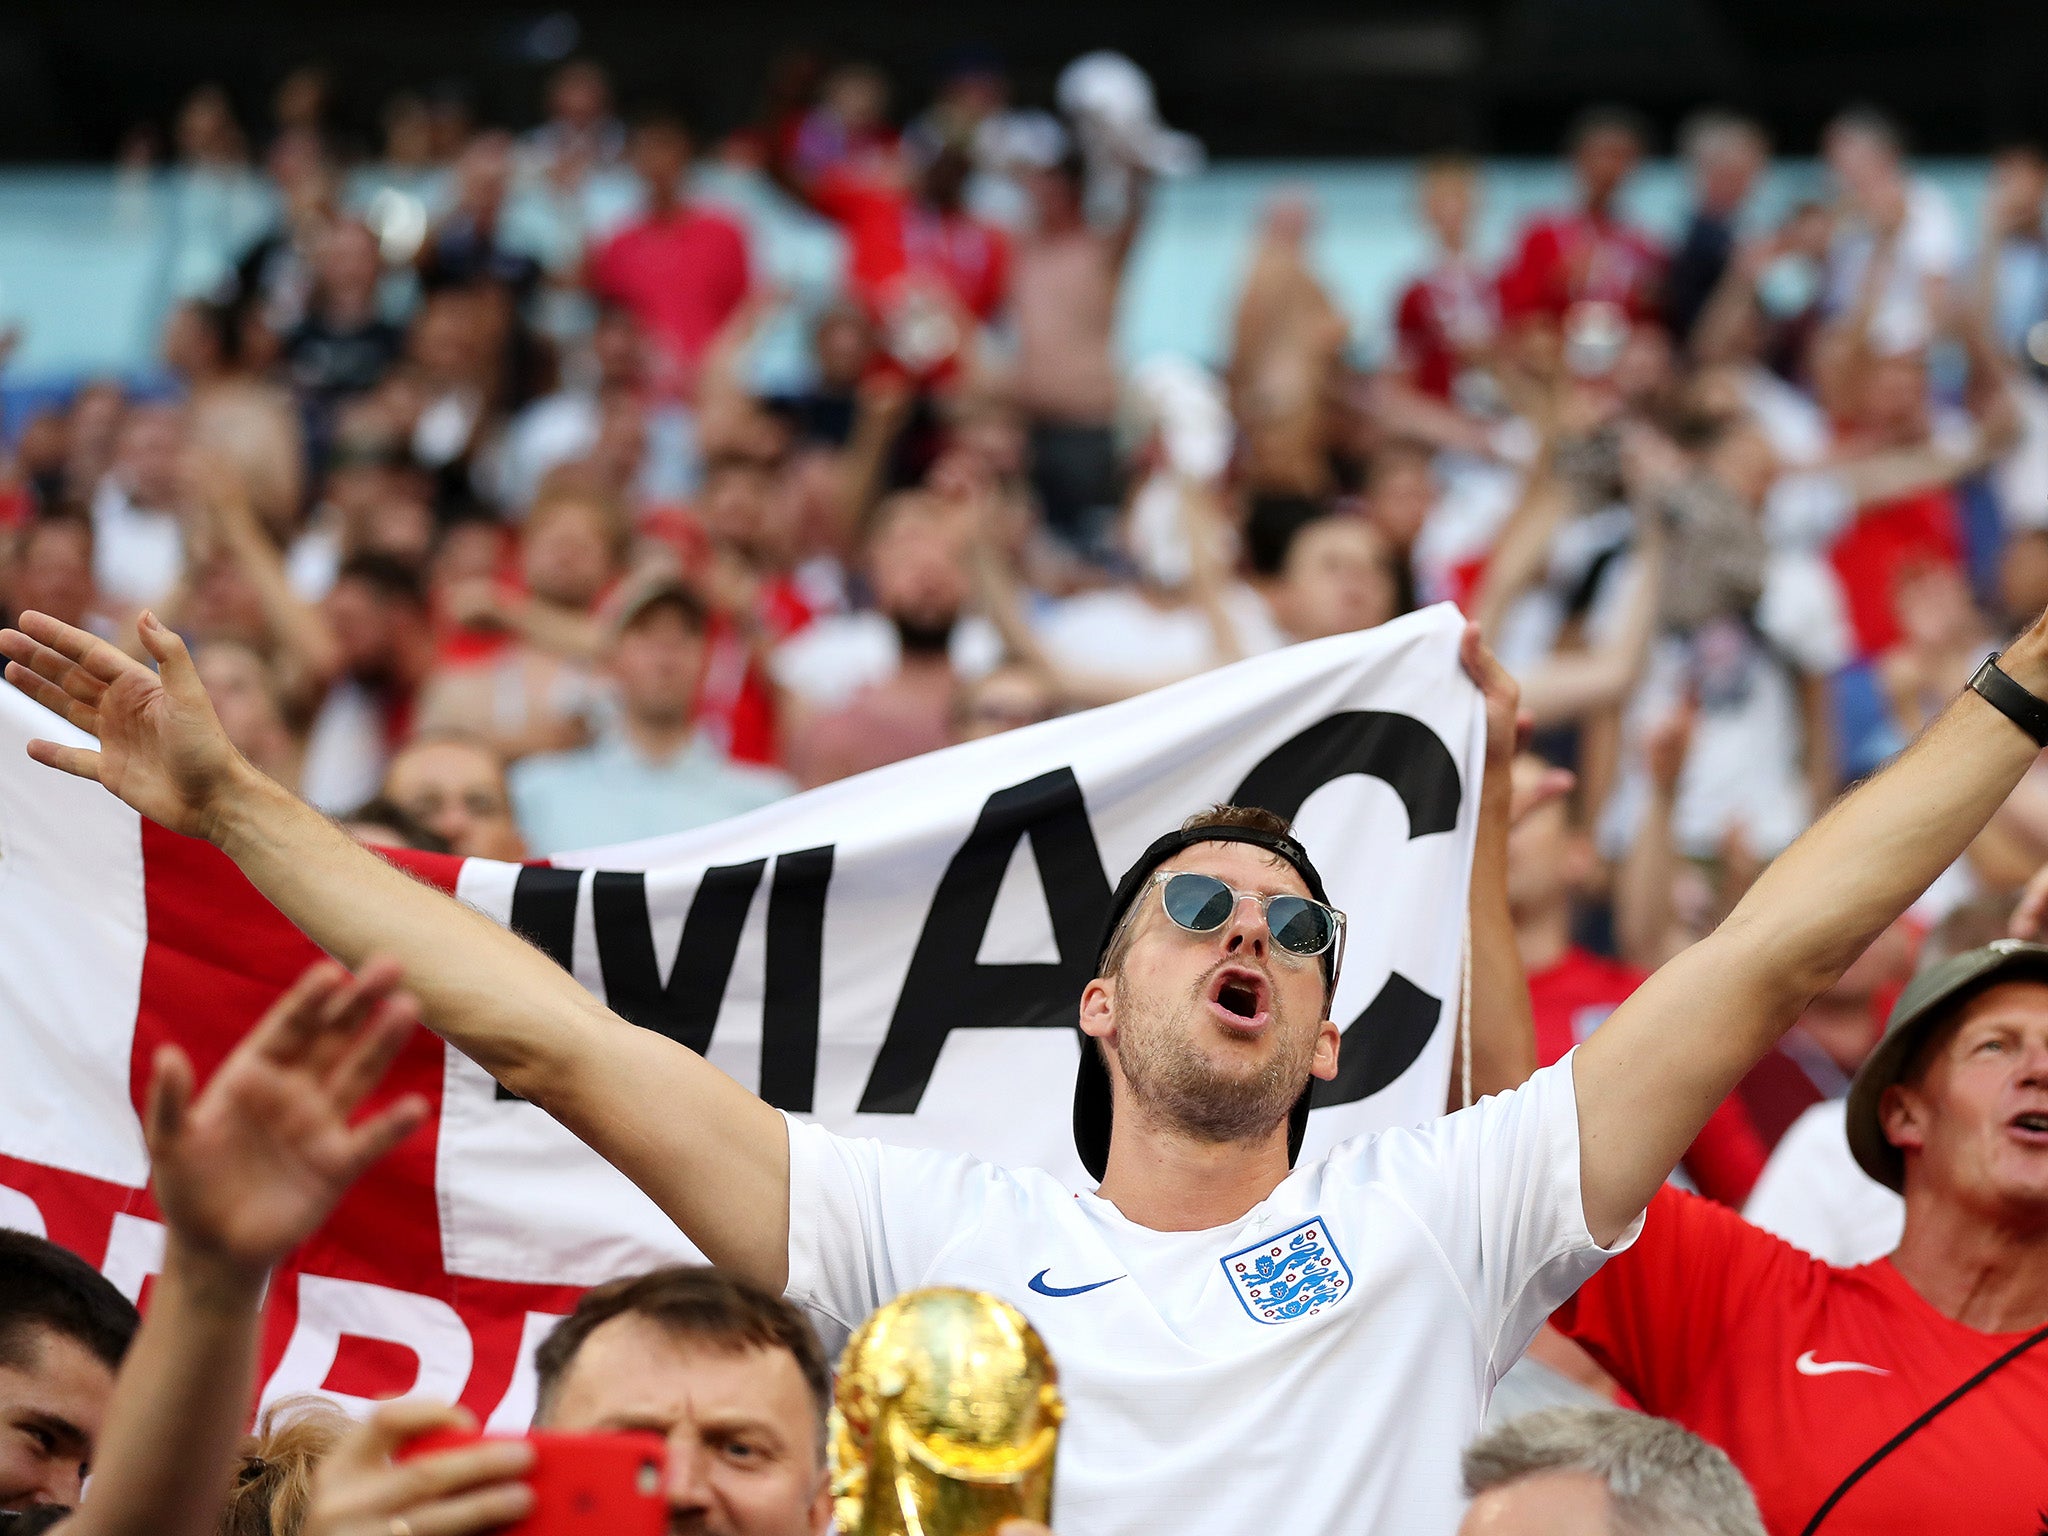 England fans outnumbered by Sweden supporters in Samara amid criticism over Russia World Cup ticketing